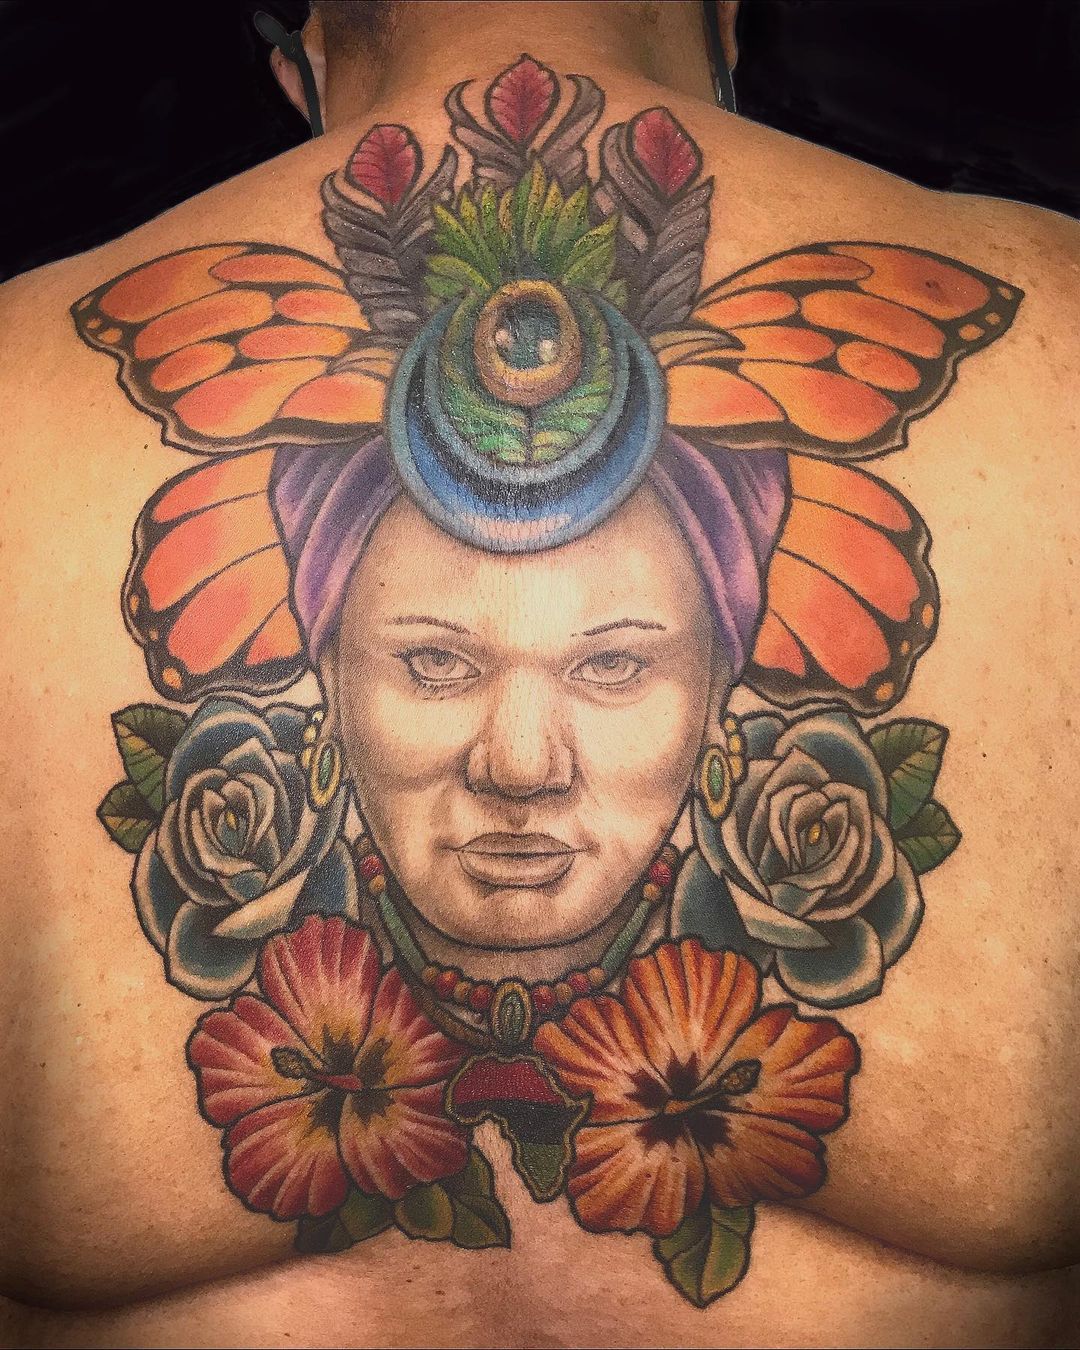 Colorful back cover-up portrait with flowers. Book a custom tattoo with Chris at Sacred Mandala Studio - Durham, NC.